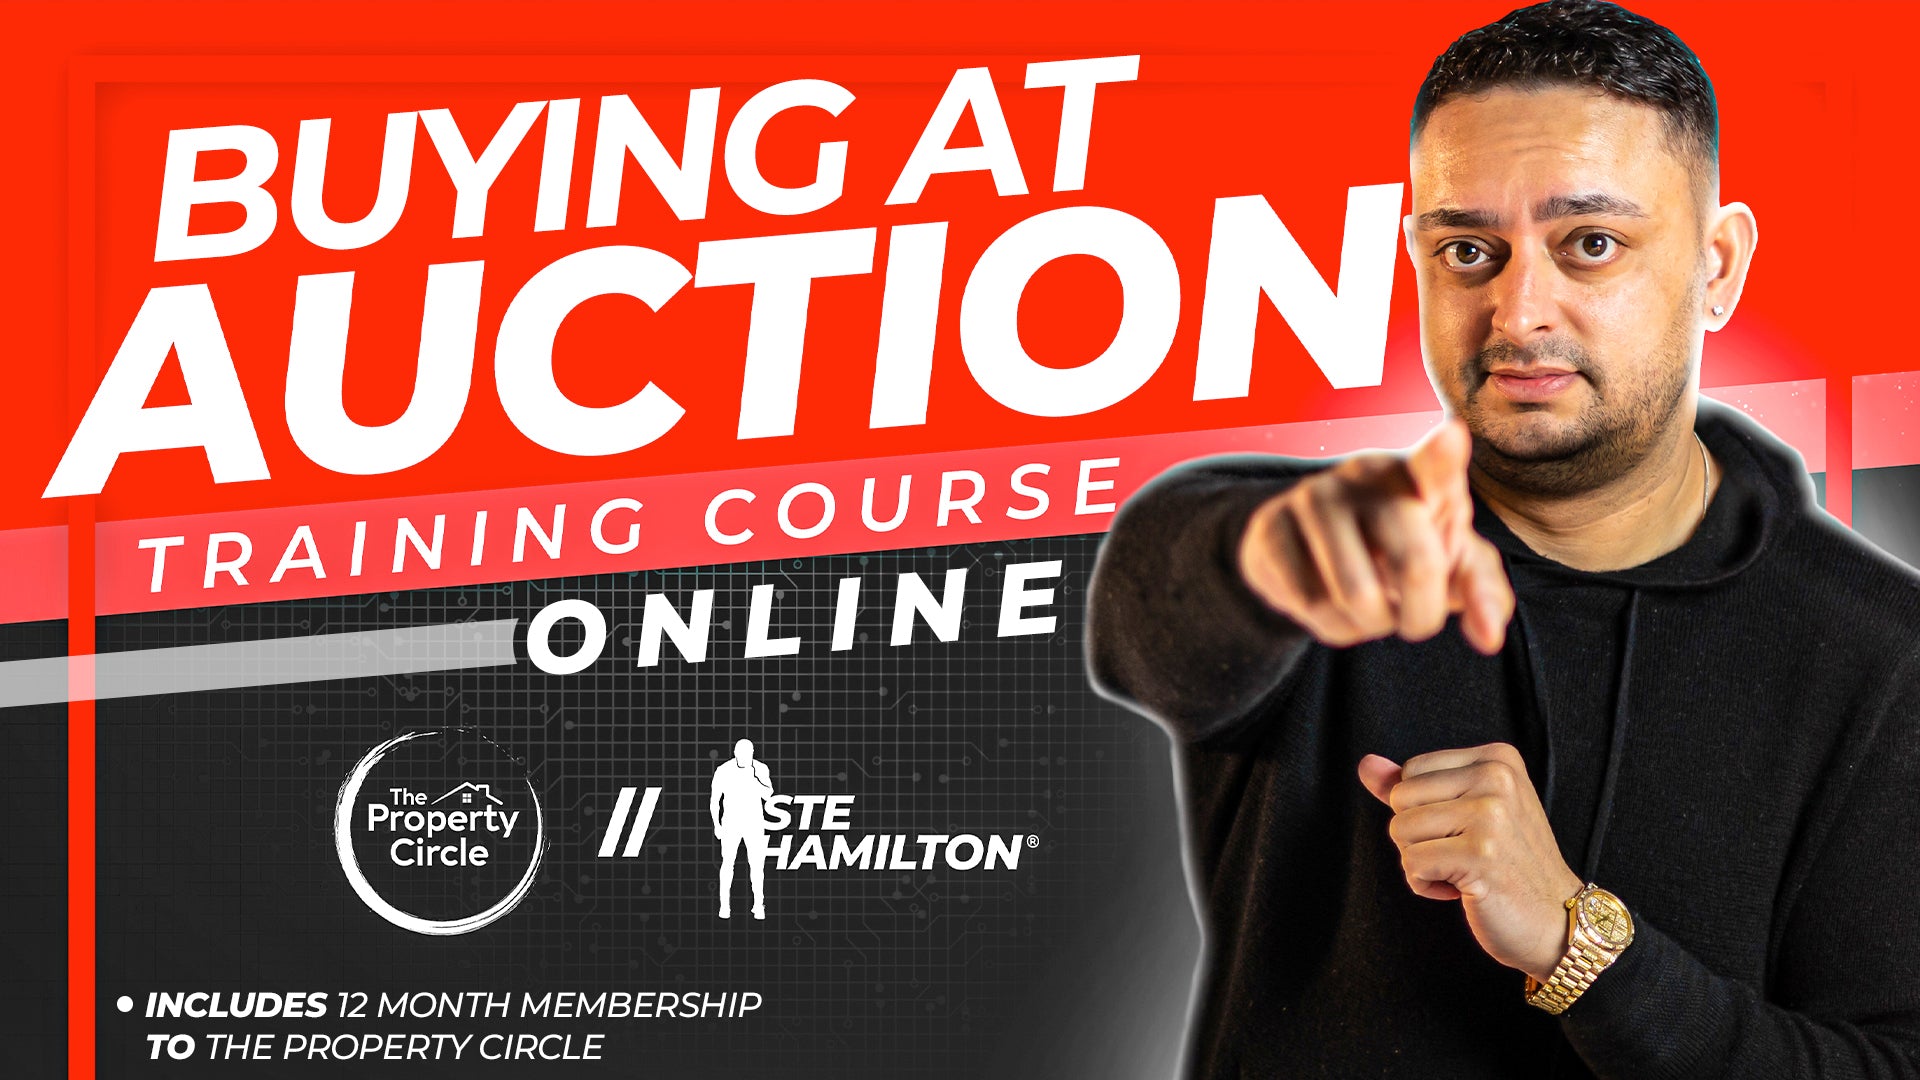 Buying At Auction Online Masterclass Event